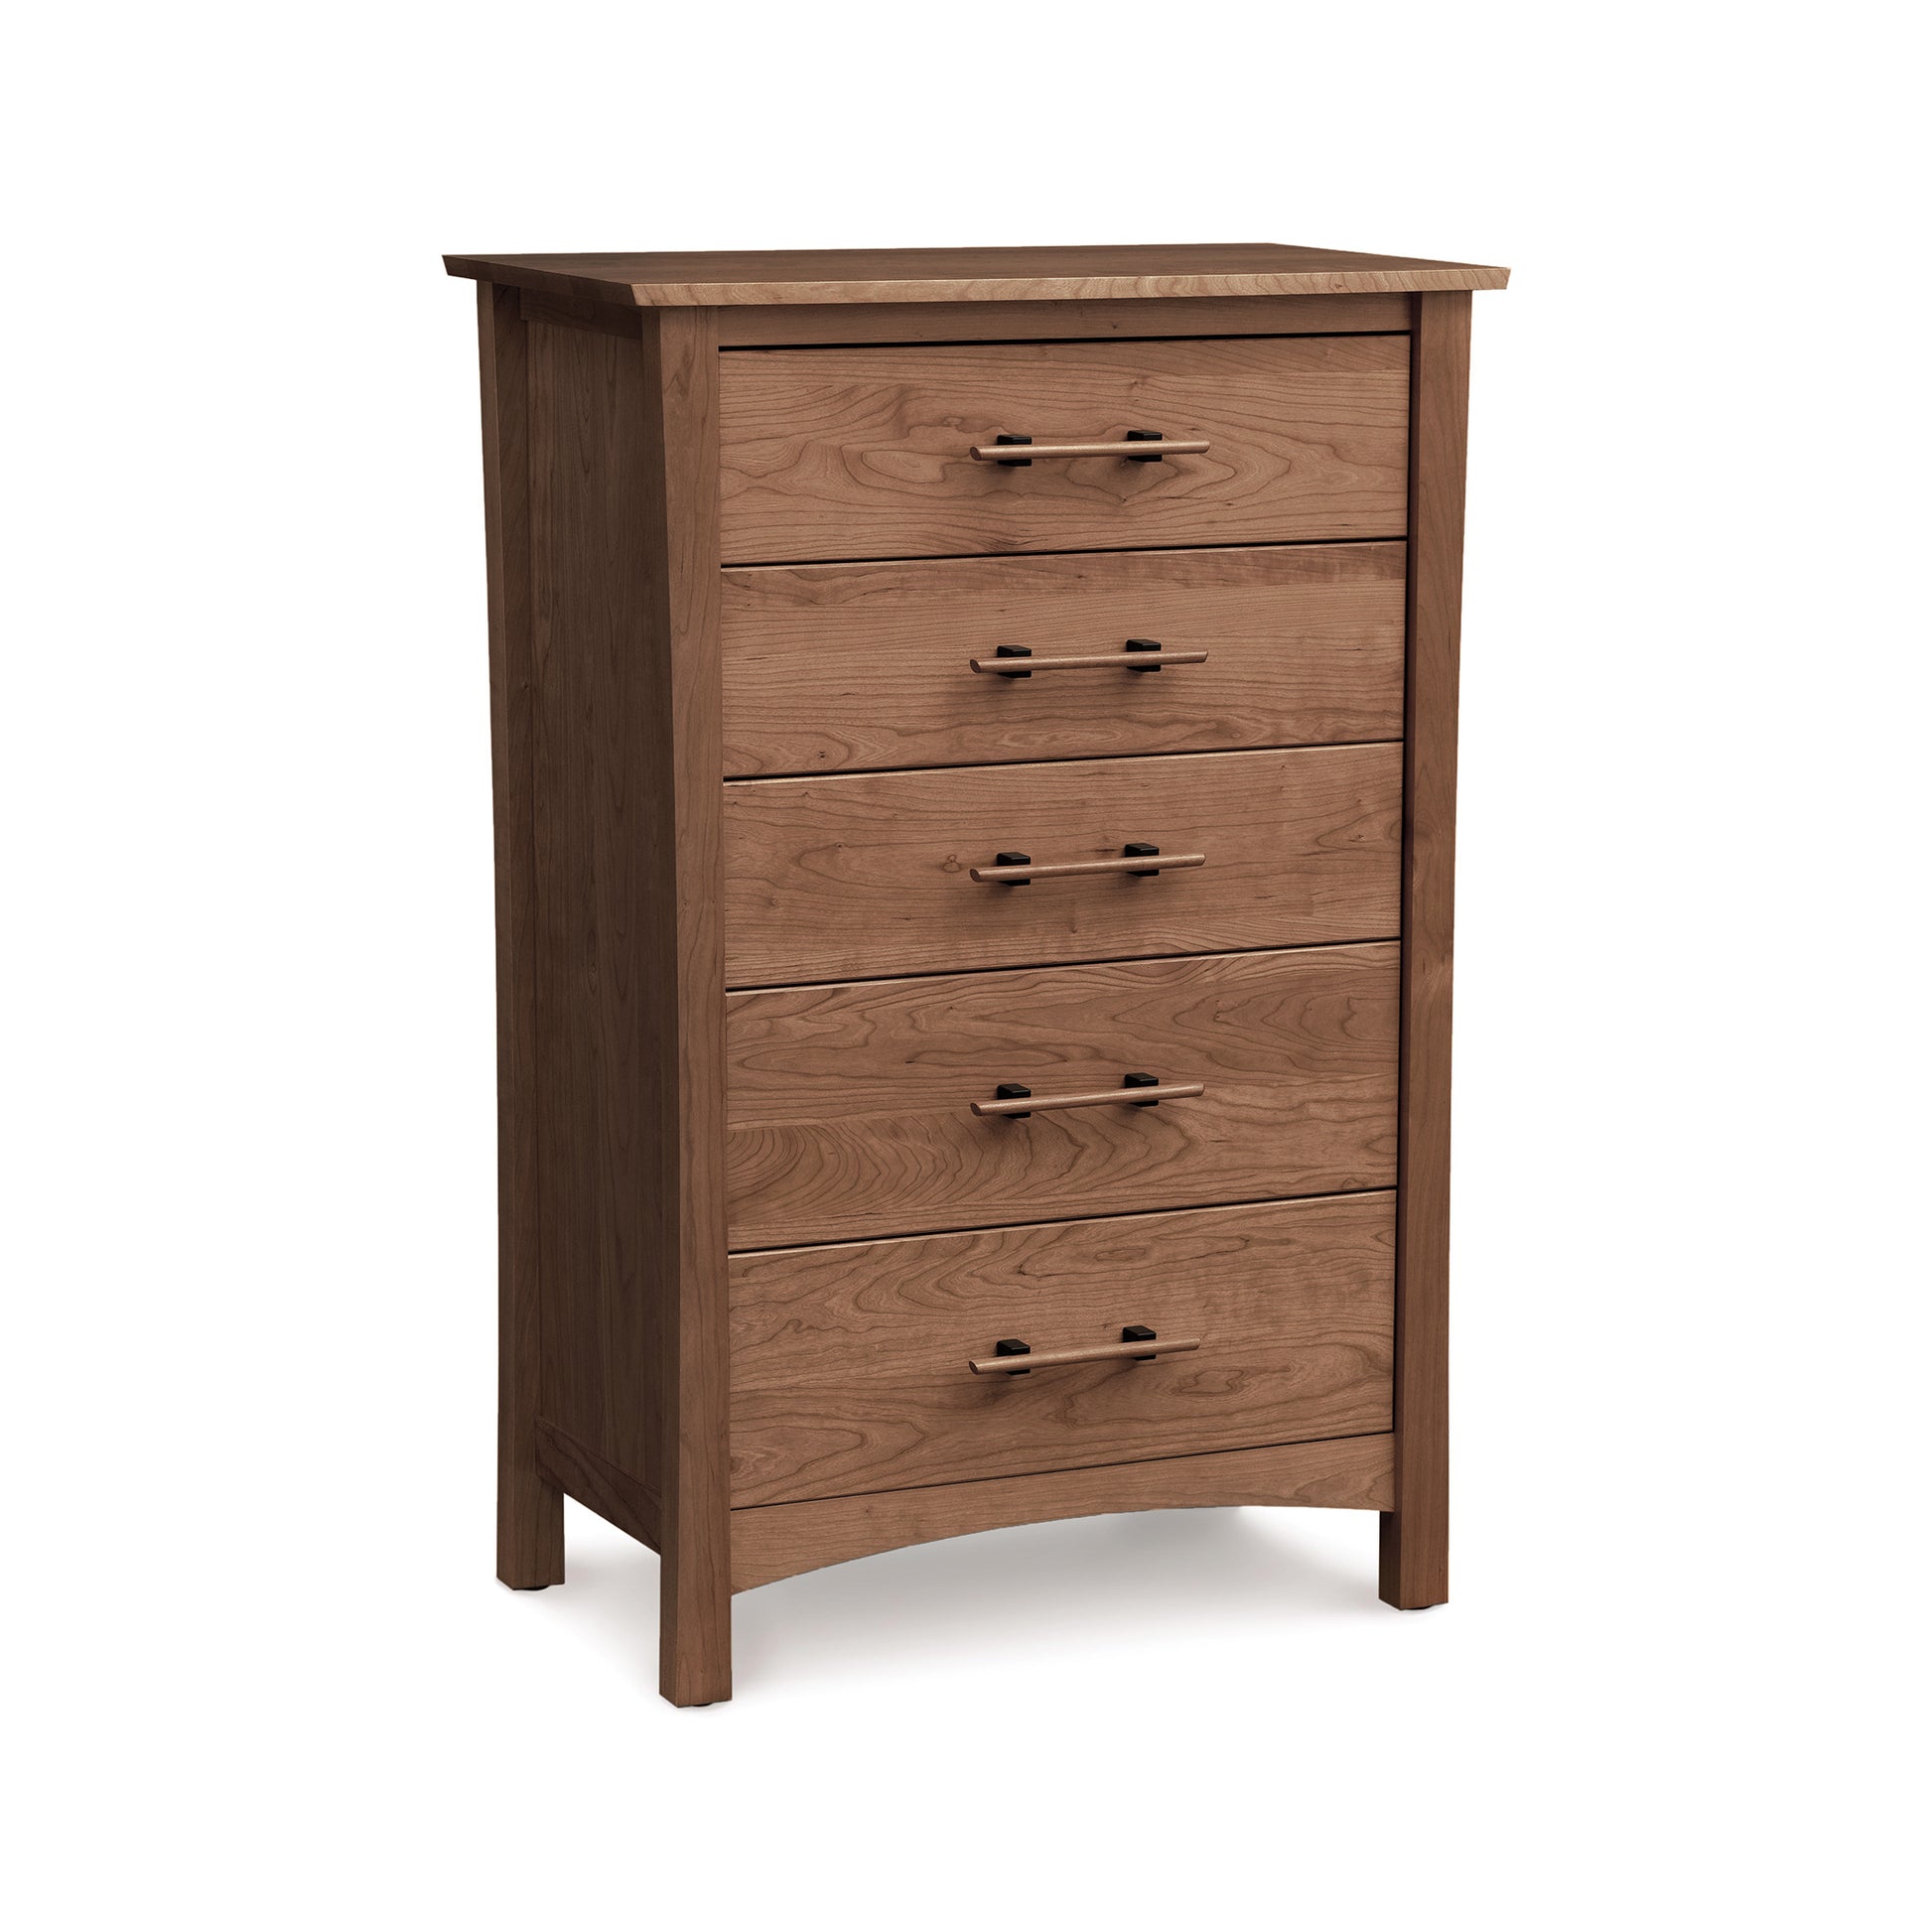 A cherry wood Copeland Furniture Monterey 5-Drawer Chest on a white background.